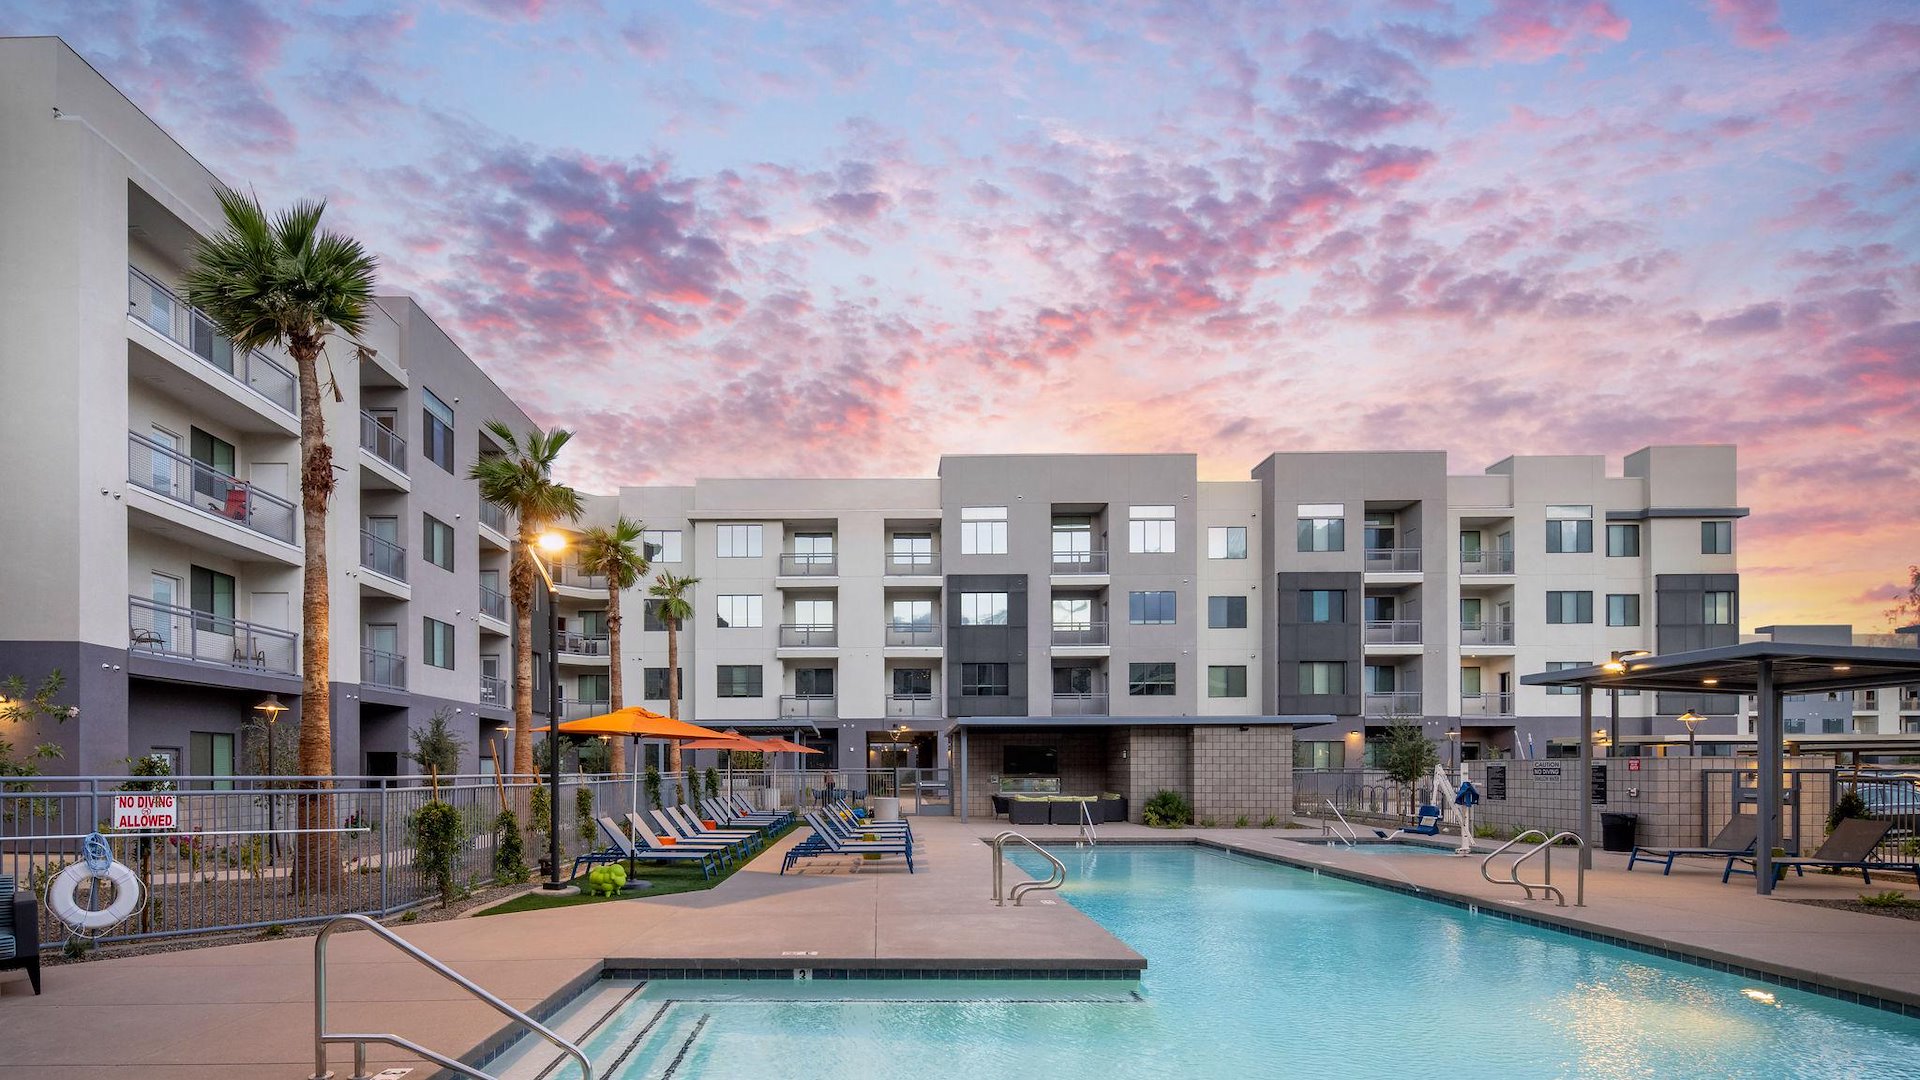 MG Properties Completes Acquisition of 324-Unit NOVO Broadway Apartment Community for $100.25 Million in Hot Tempe Market